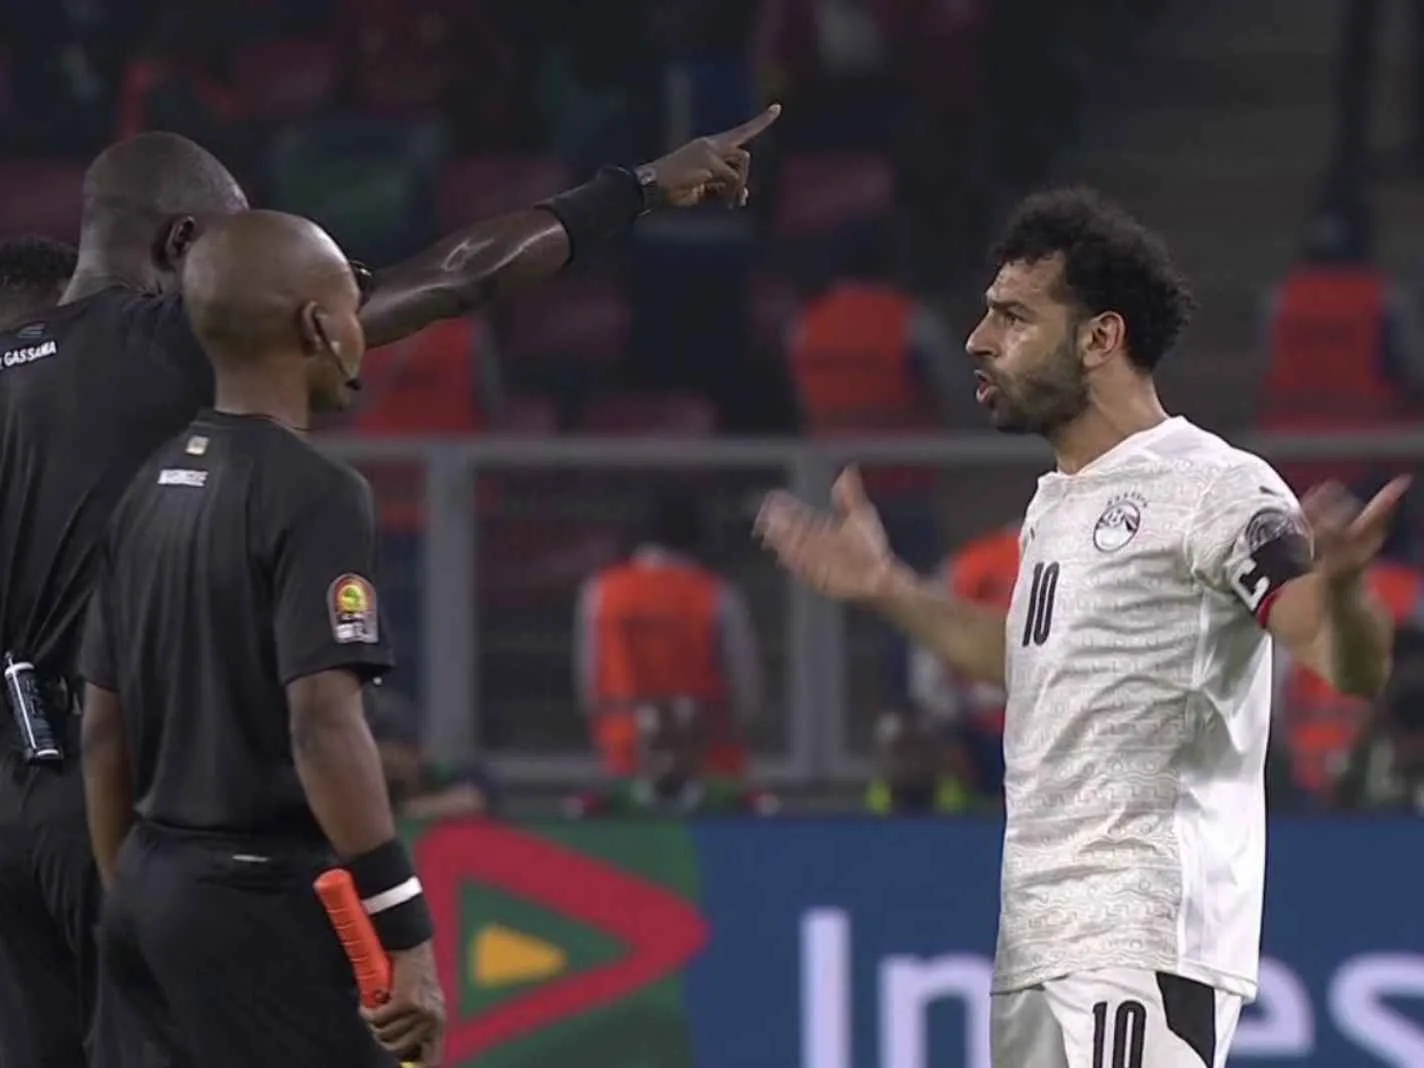 Mohamed Salah's fiery confrontation with AFCON referee